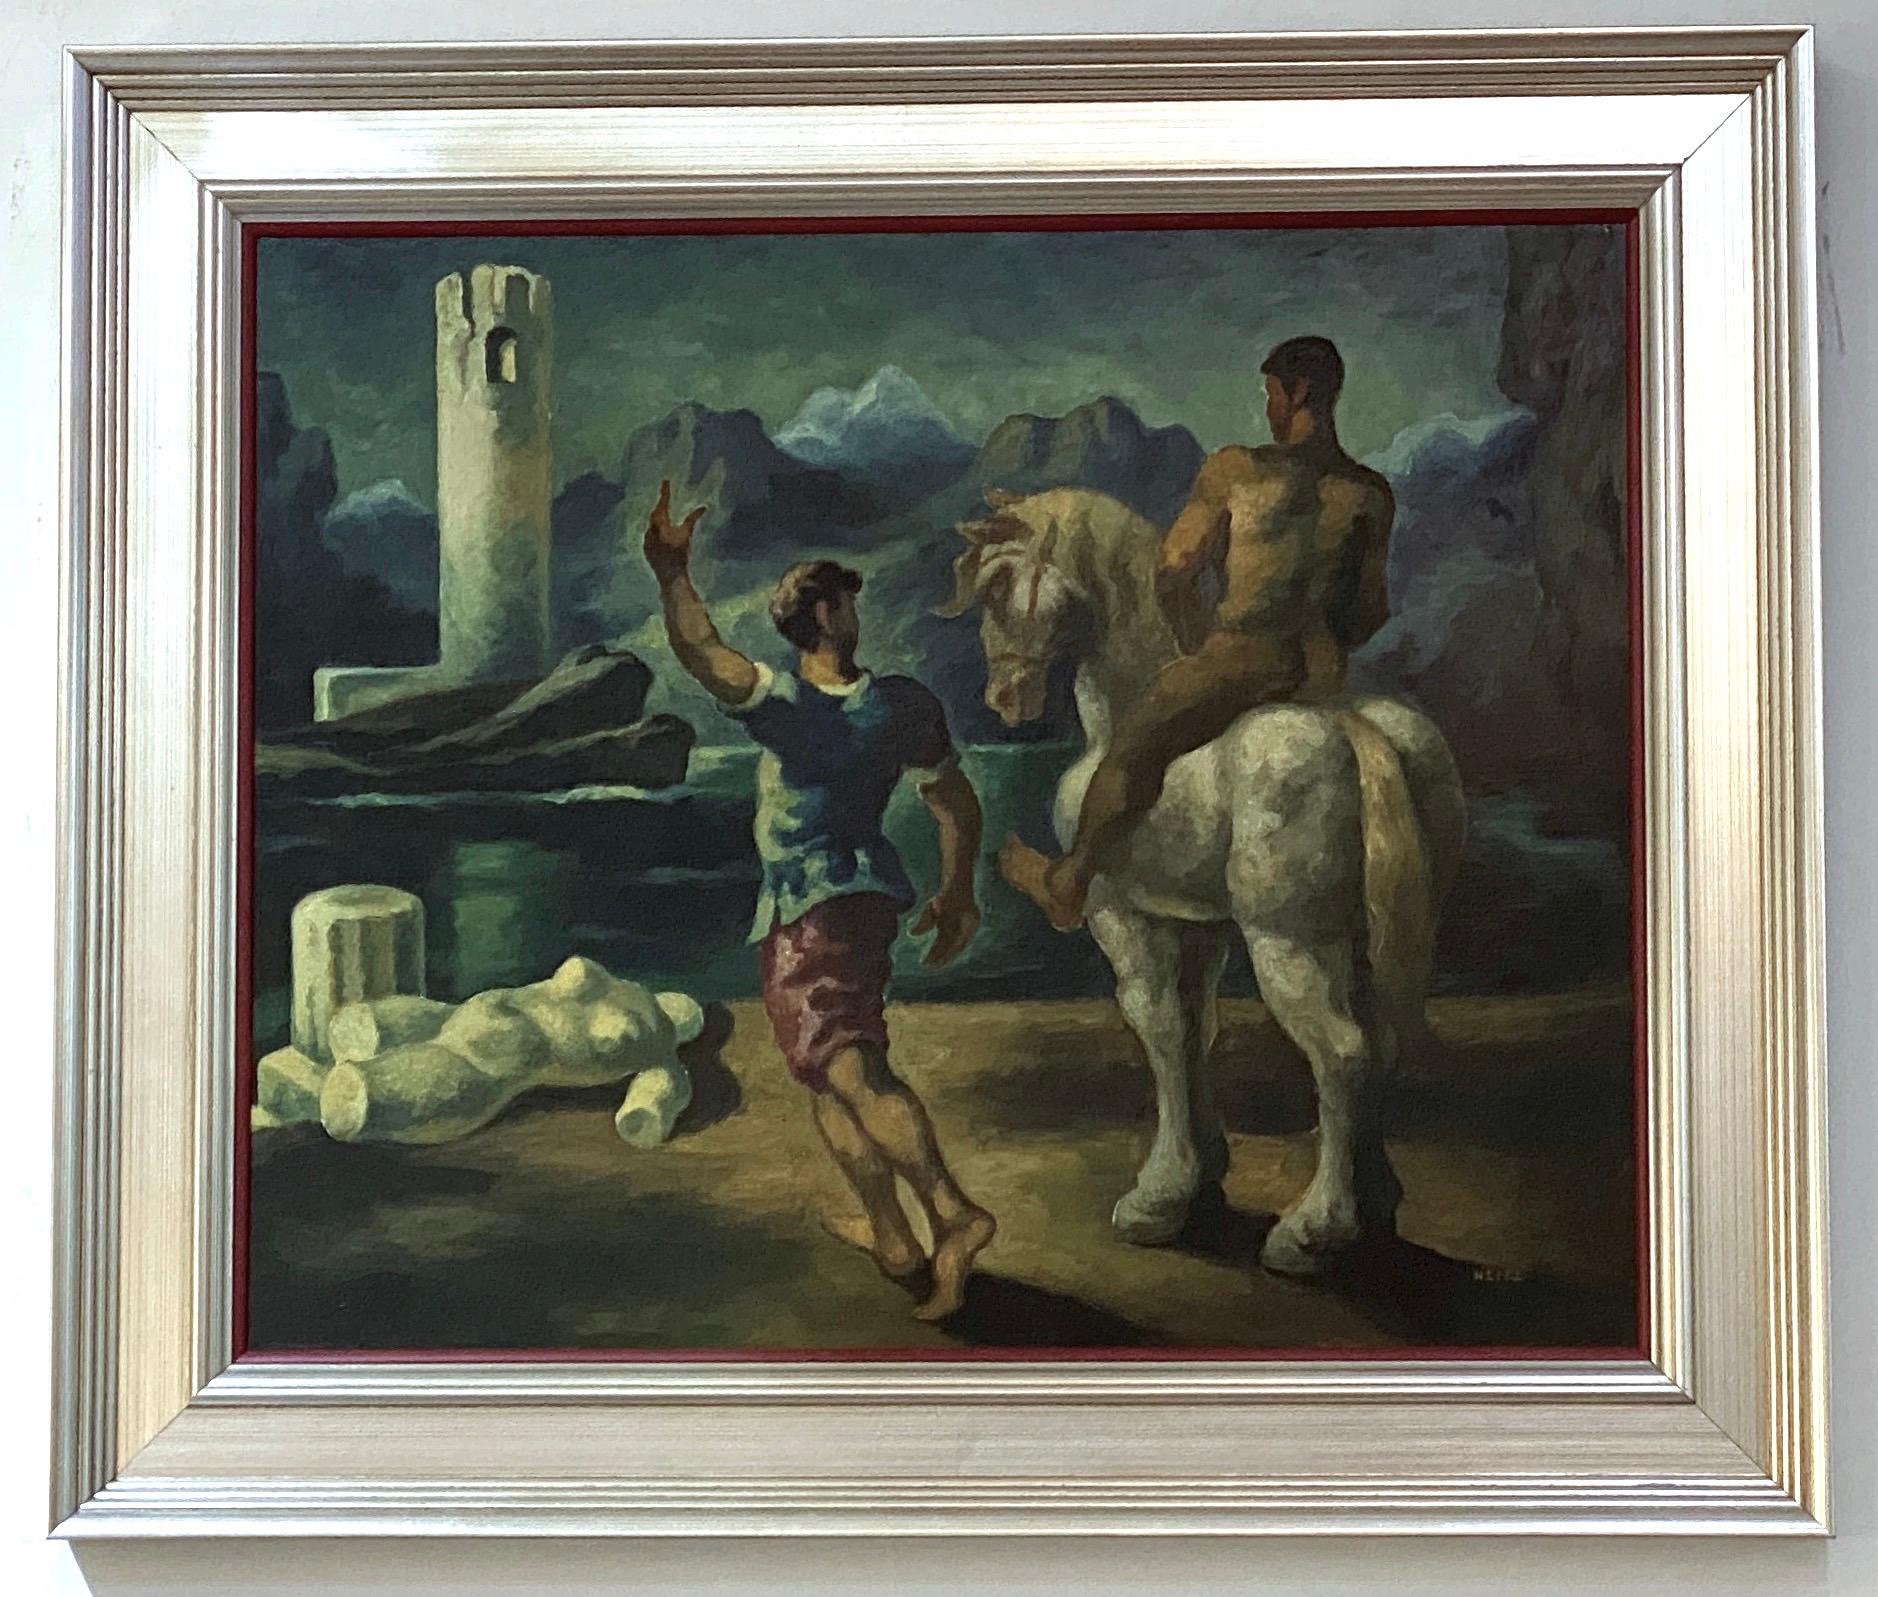 Oil painting on art board by the French artist Robert Heitz, of two men, one on horseback, walking through a landscape with ancient ruins, painting is from a Palm Beach estate.

Robert Heitz was born in Saverne, France August 1895 and died in